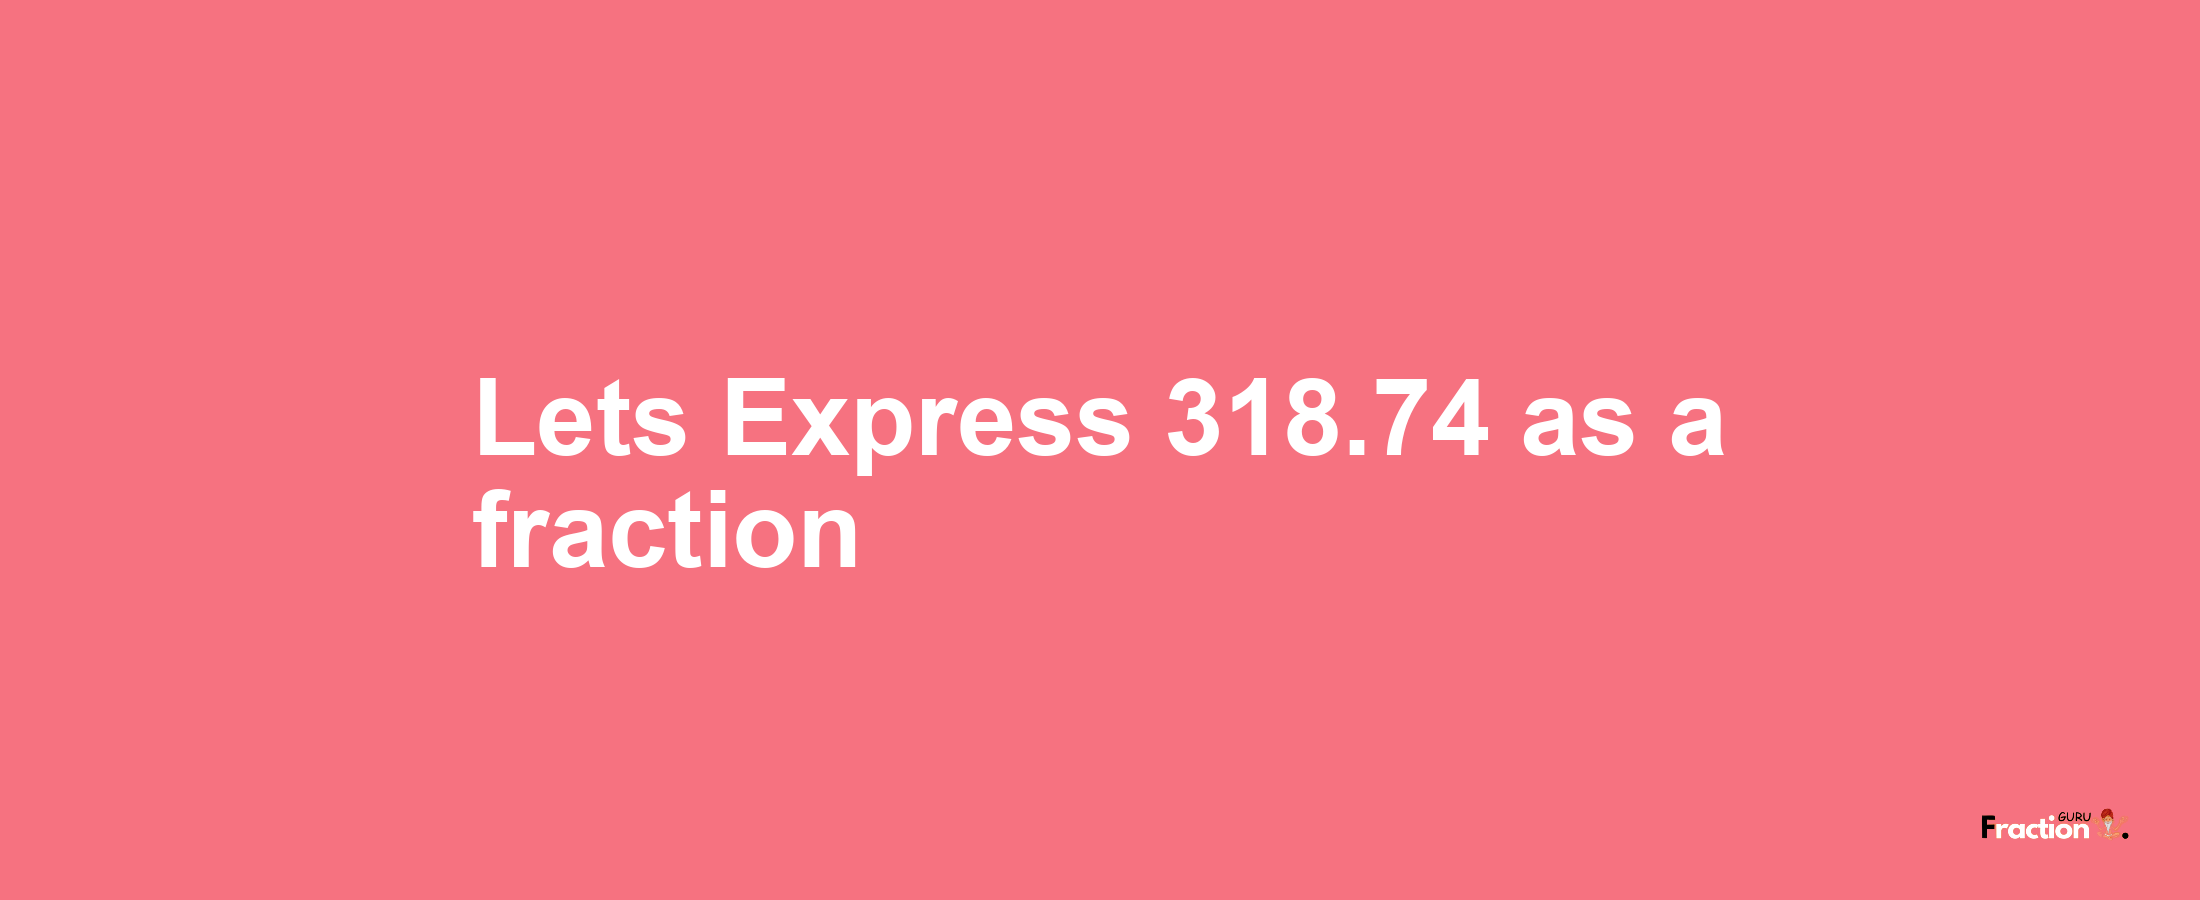 Lets Express 318.74 as afraction